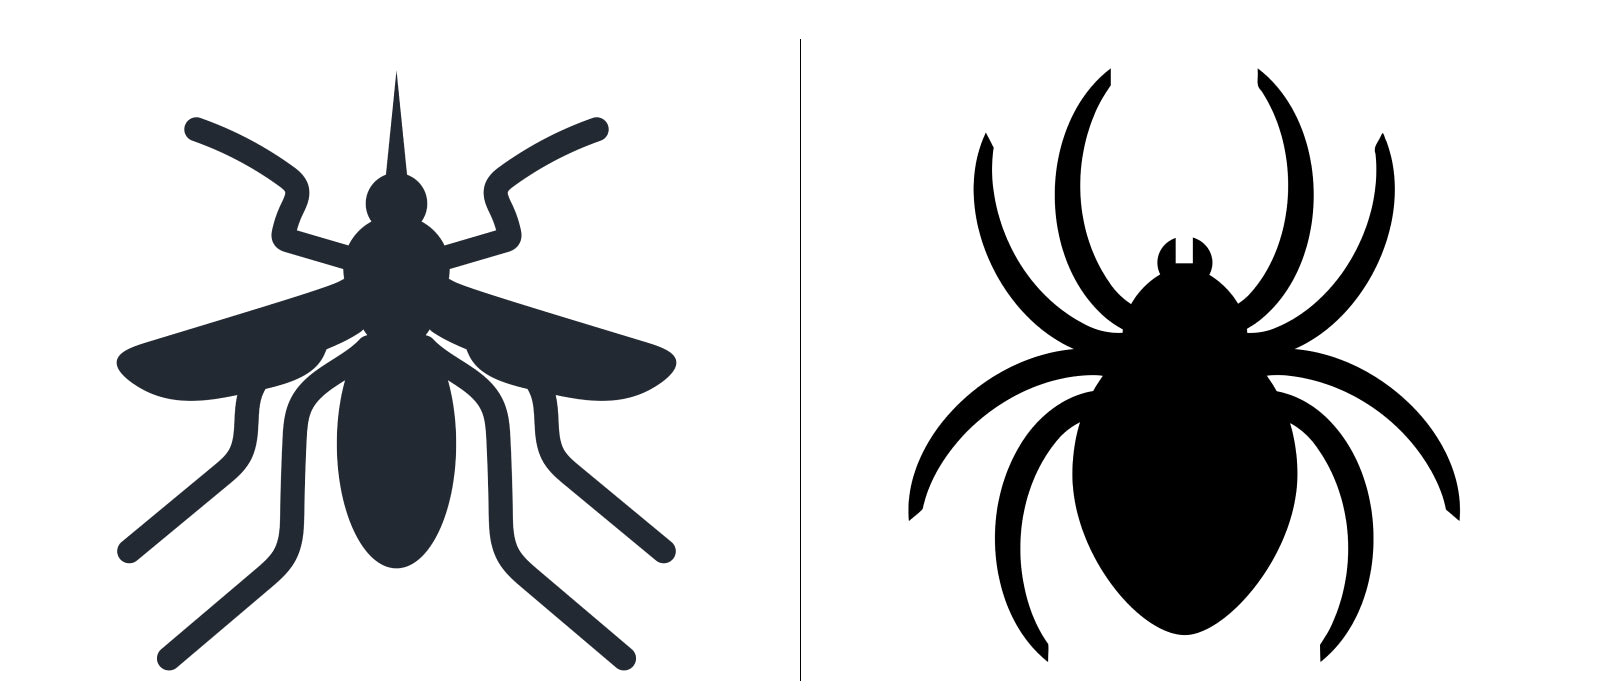 Wondercide pumpkin carving templates mosquito and spider